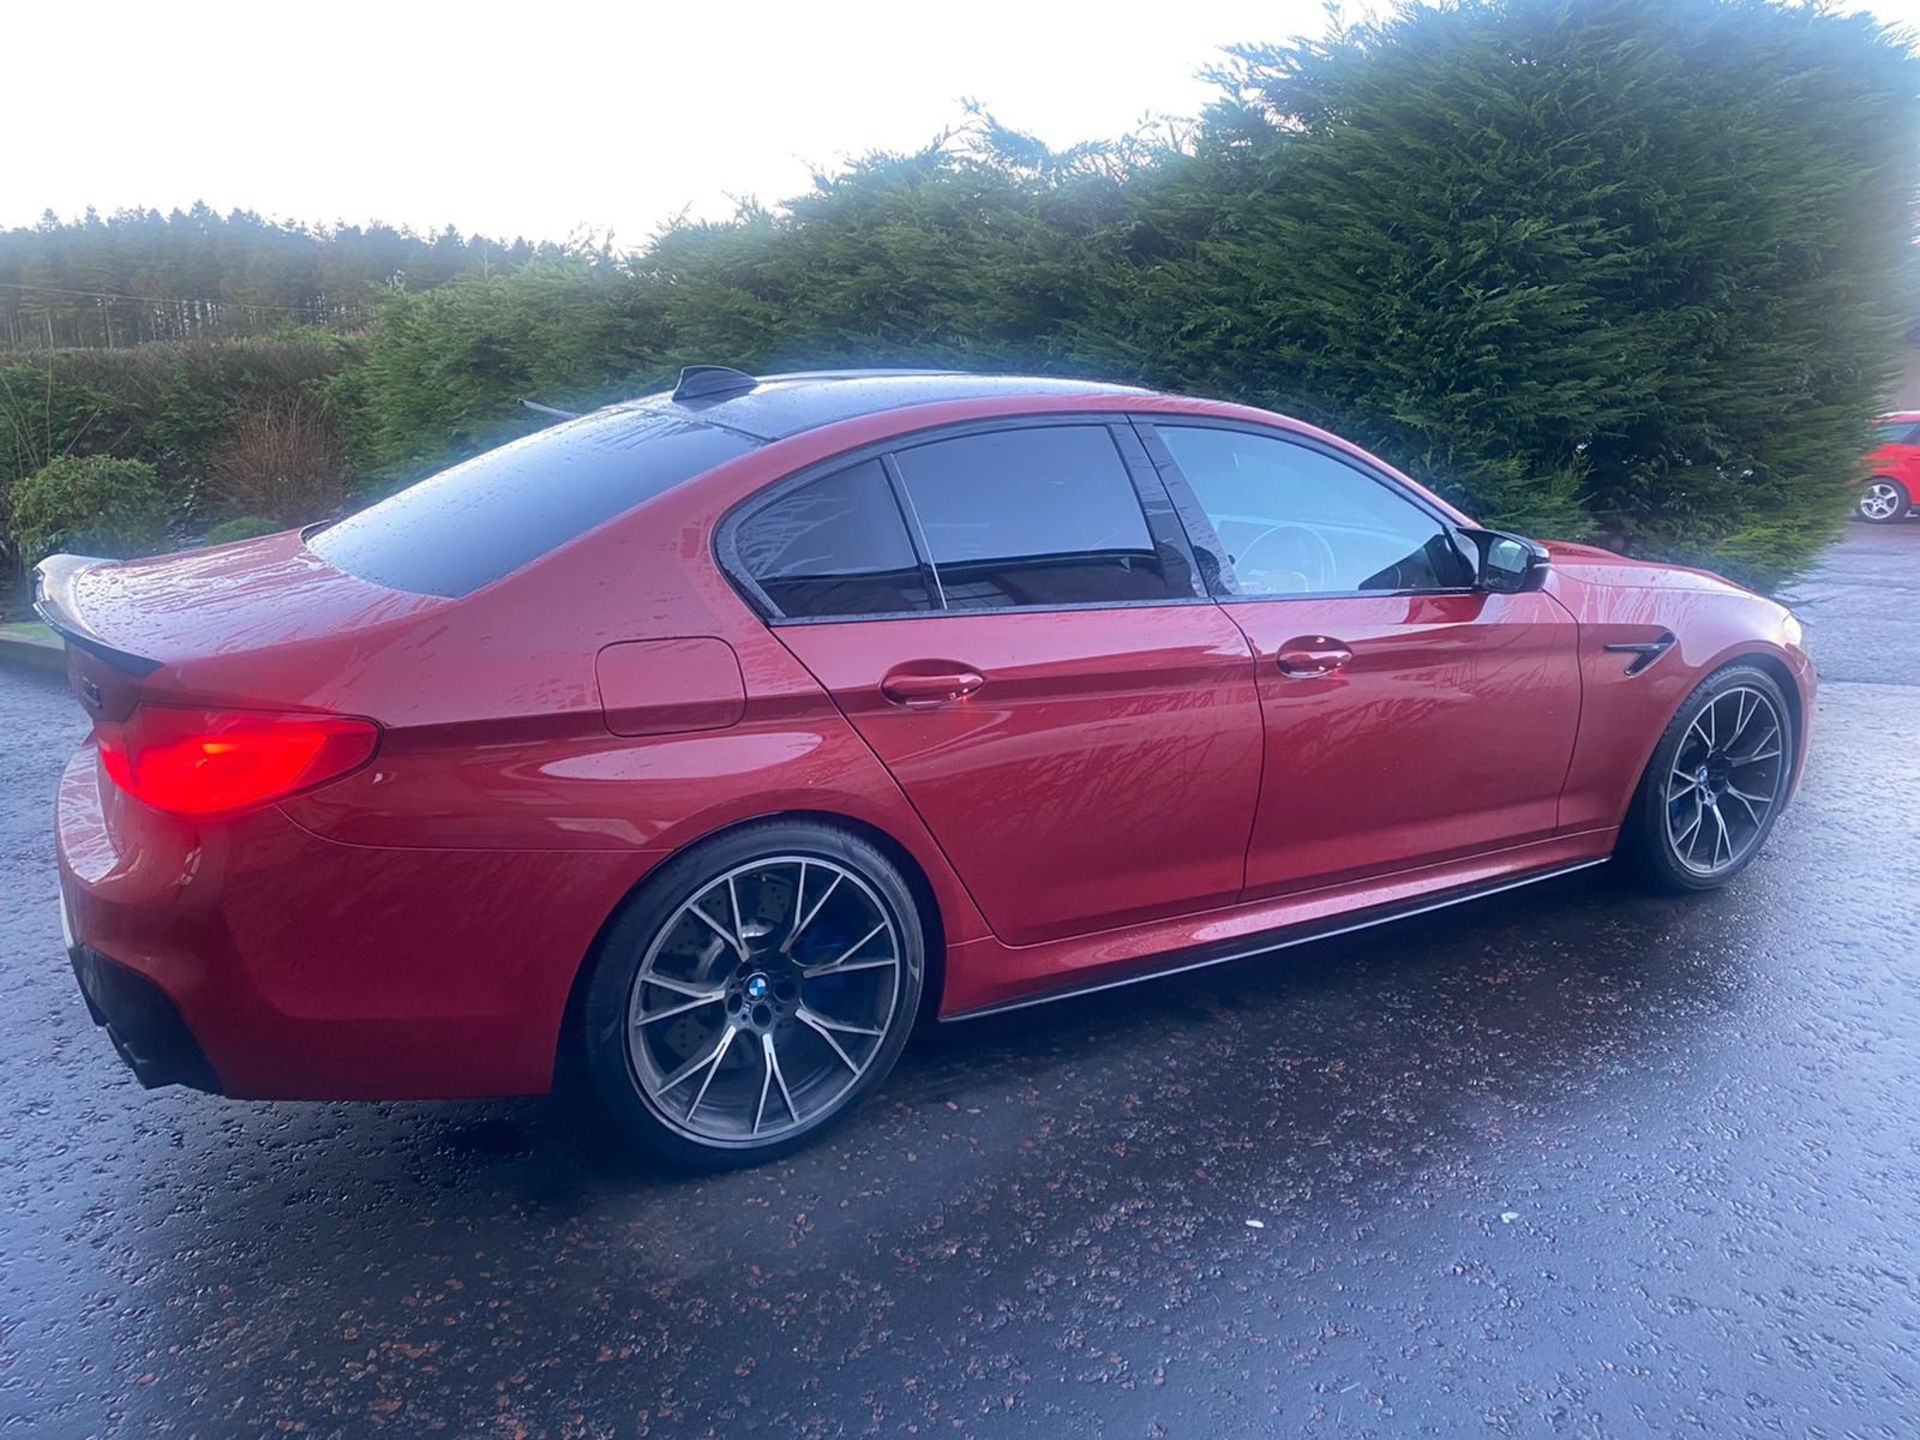 2019 BMW M5 COMPETITION AUTO RED SALOON, 18K MILES, SPECIAL ORDER RED, ONLY 4 IN THE UK *NO VAT* - Image 5 of 8